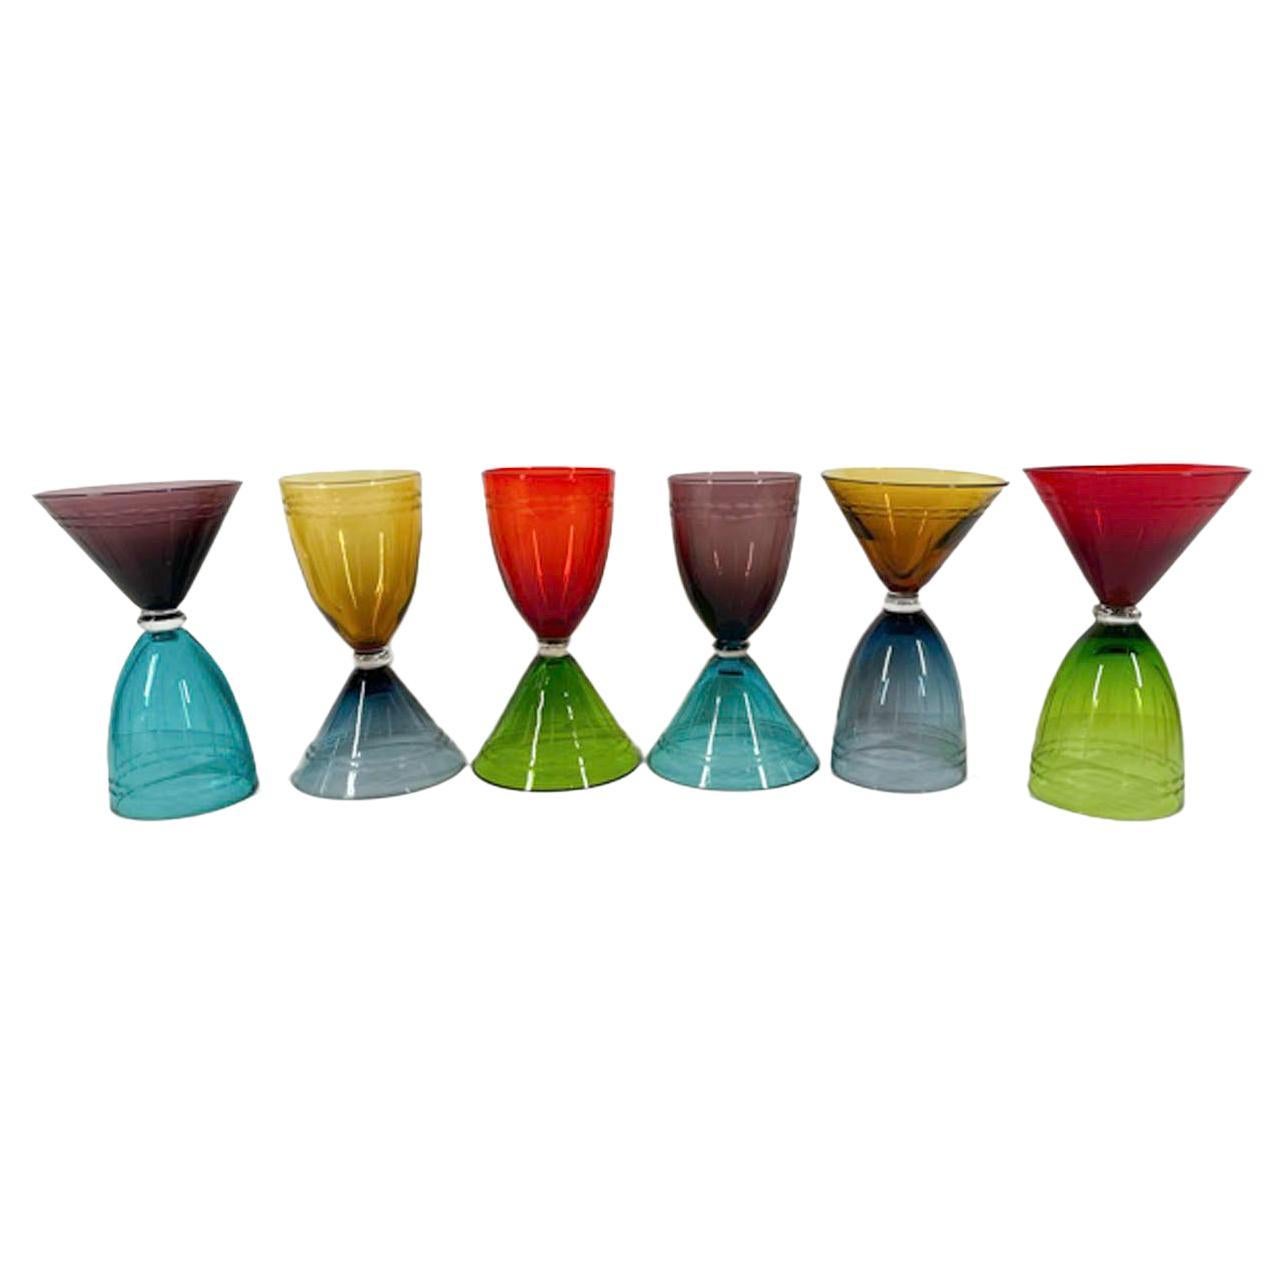 Six Vintage, Jewel Colored, Double Sided Martini/Wine Glasses, Three Pairs For Sale